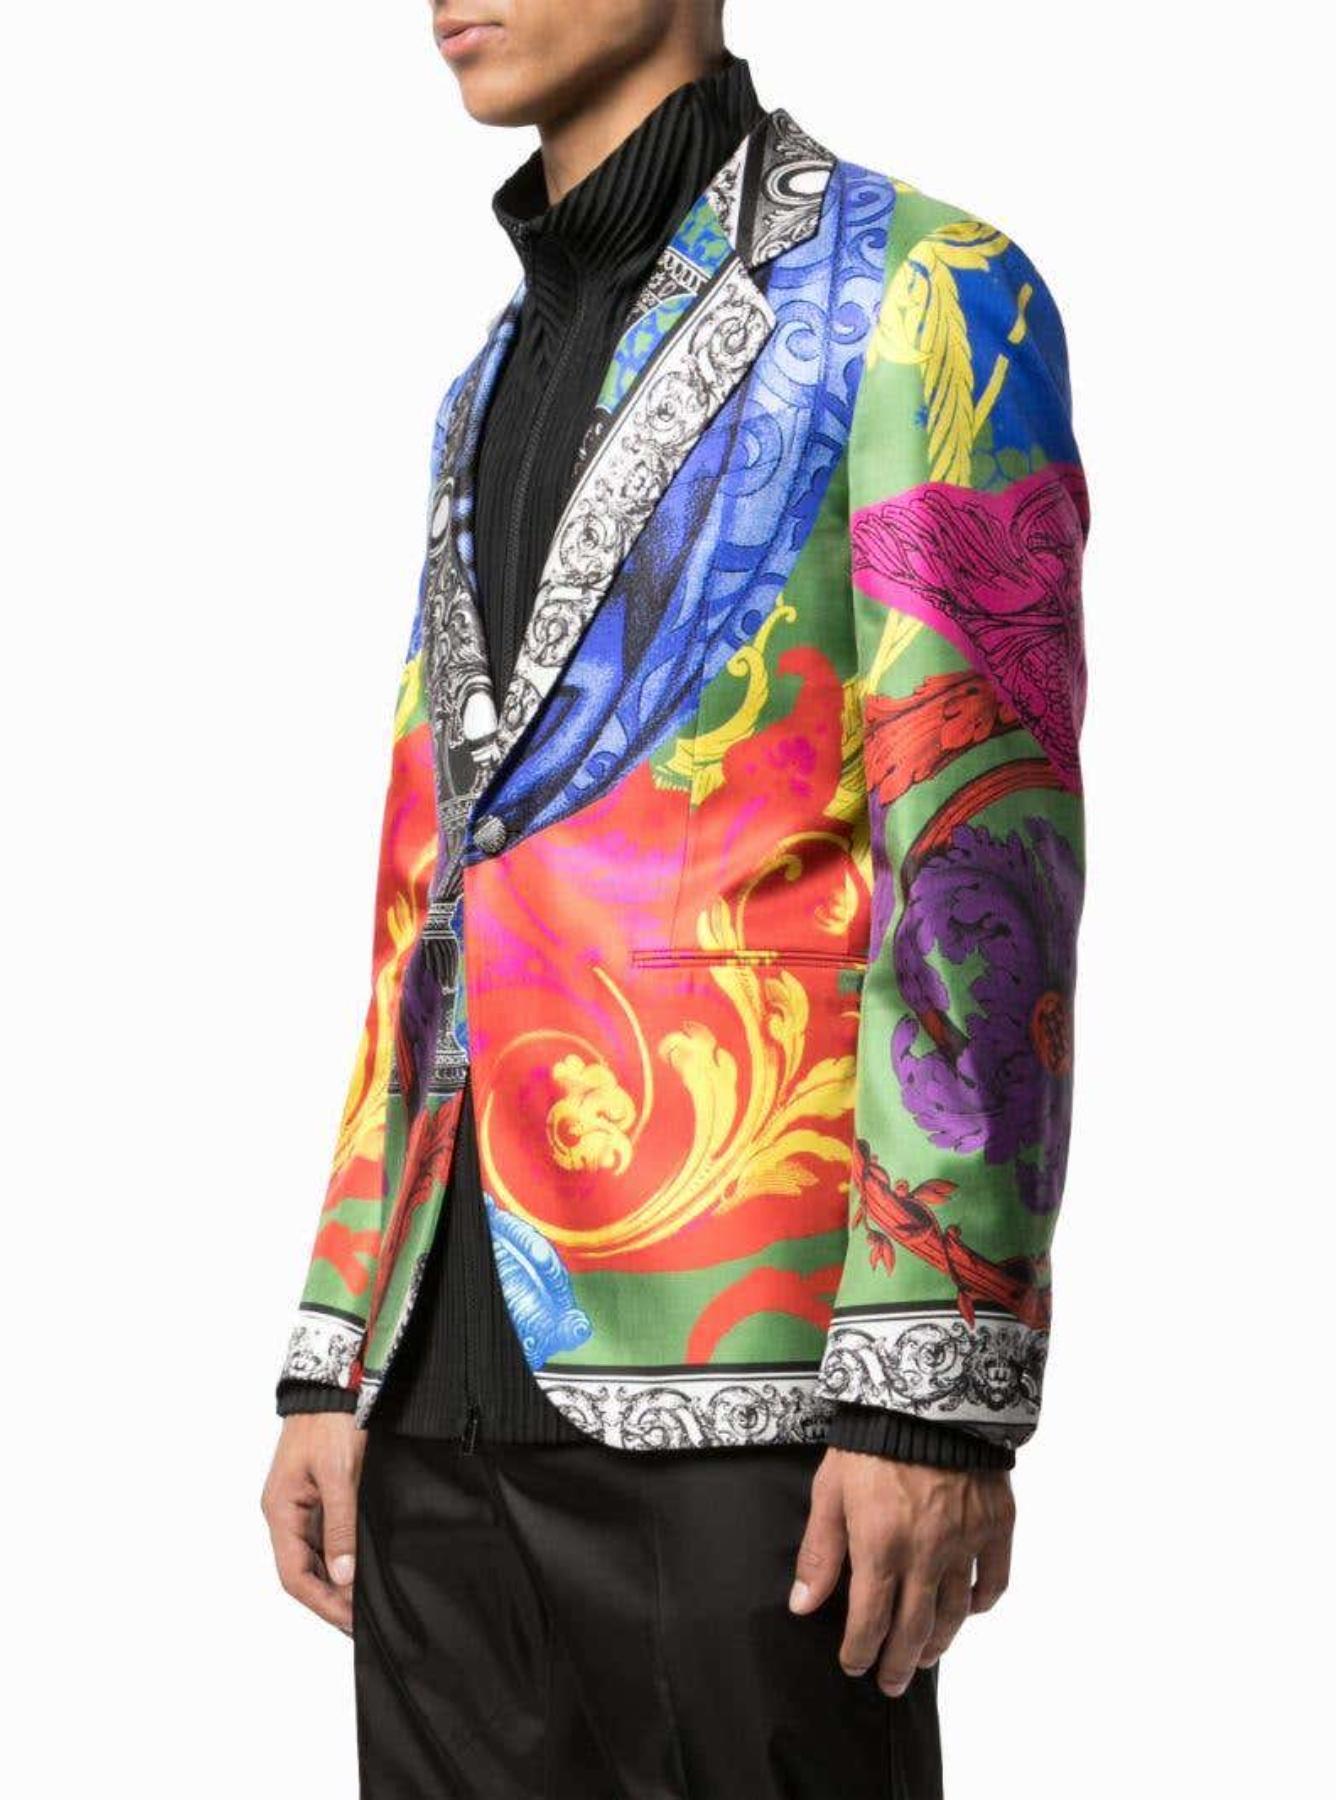 Versace Mens Magna Grecia Multicolor Print Silk Dinner Jacket / Blazer

Legendary designer and founder Gianni Versace’s groundbreaking vision helped to reshape the fashion industry and secured the brand’s place as a symbol of glamour, decadence and